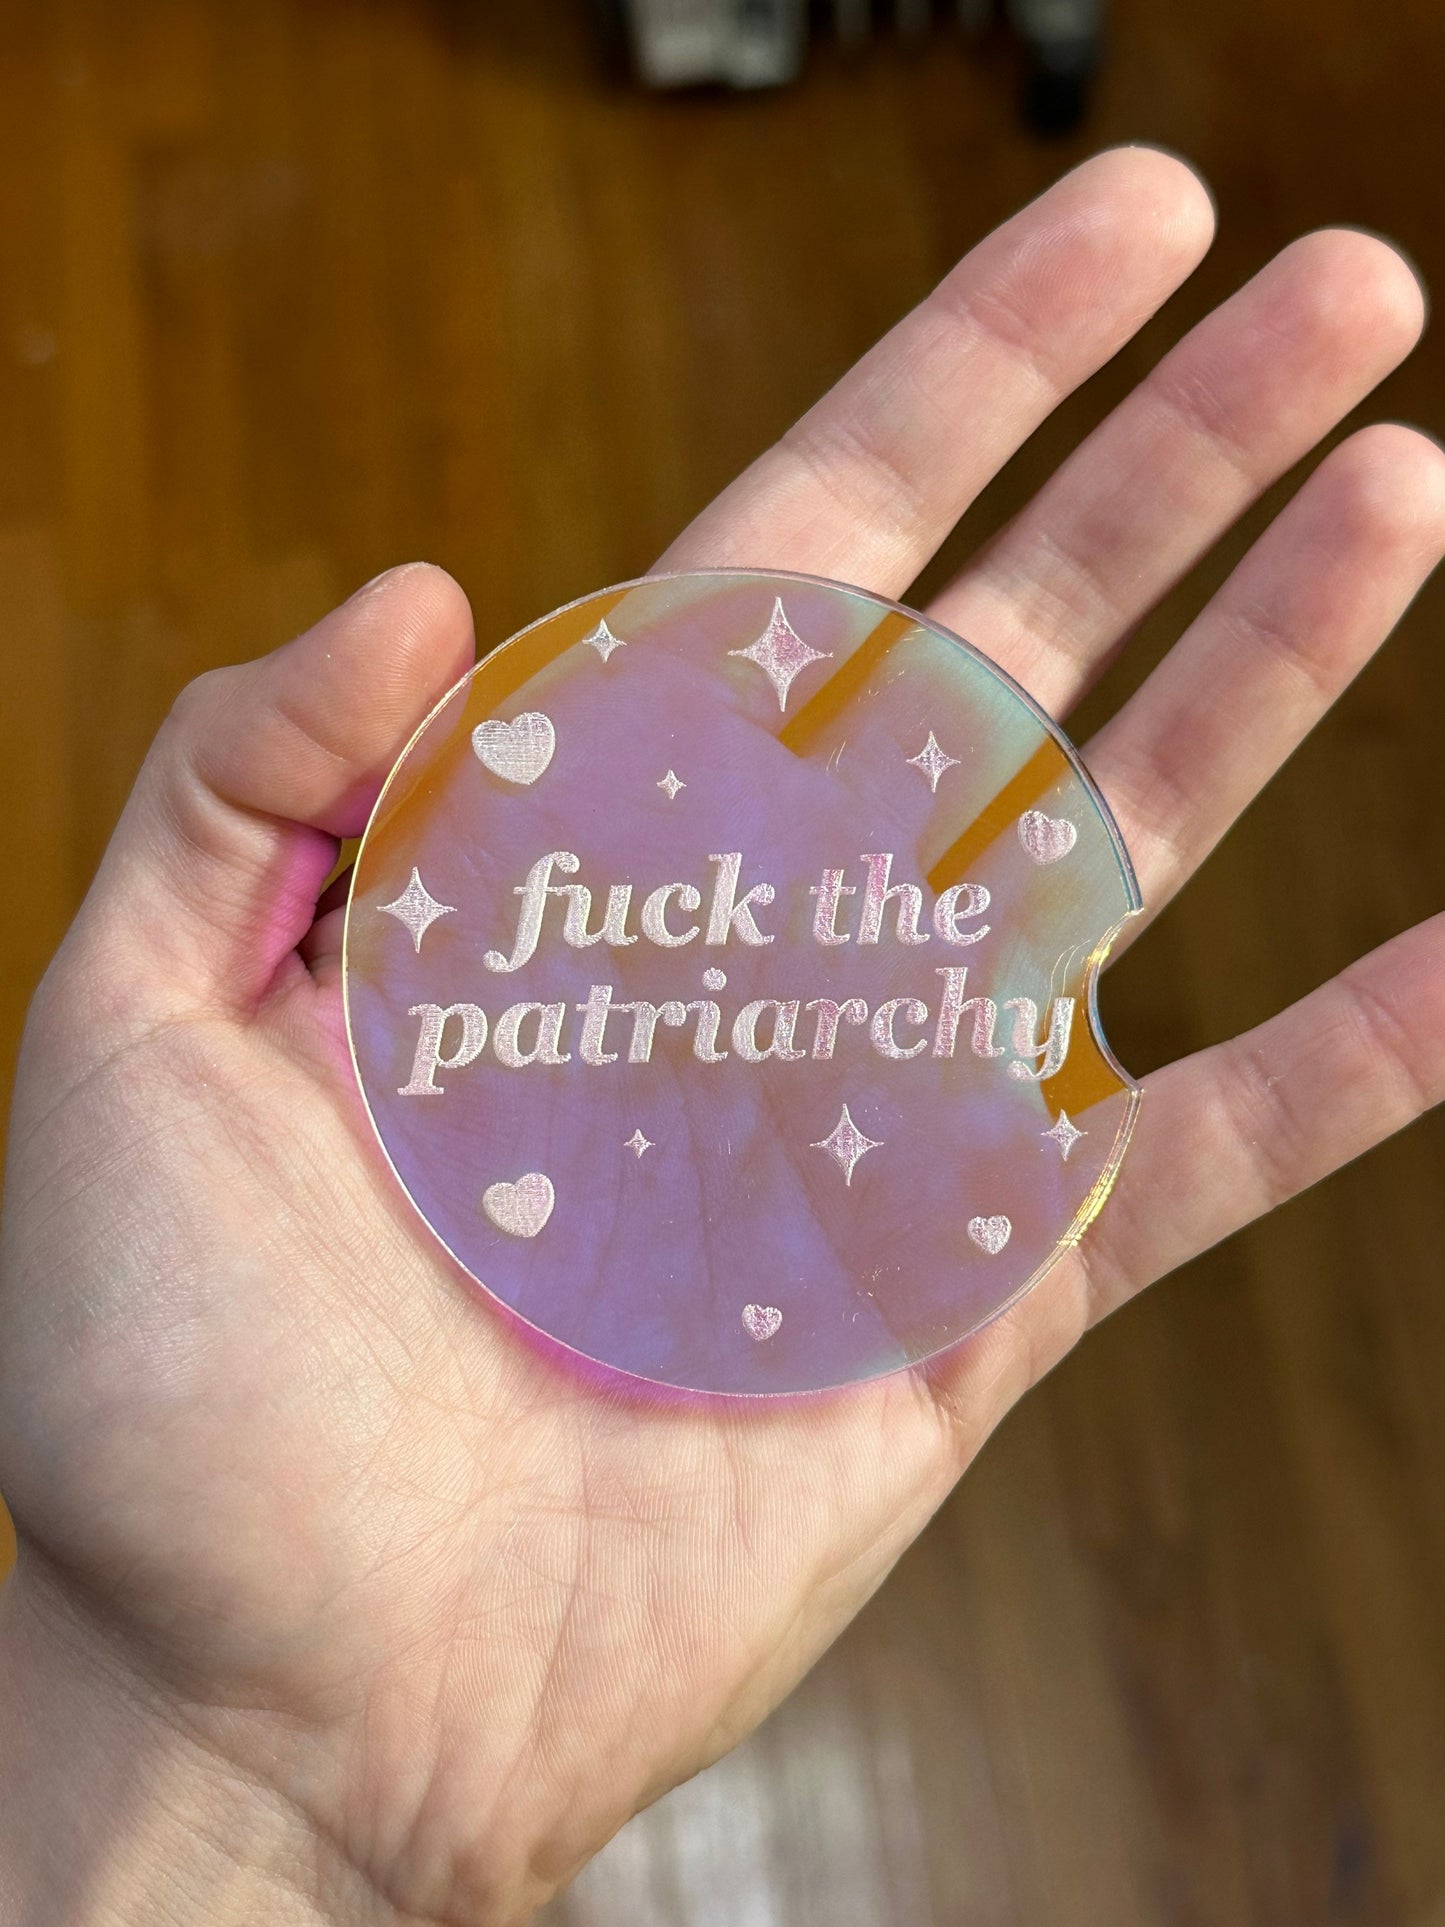 3 Inch Iridescent Car Coaster (Set of 2) - Fuck The Patriarchy